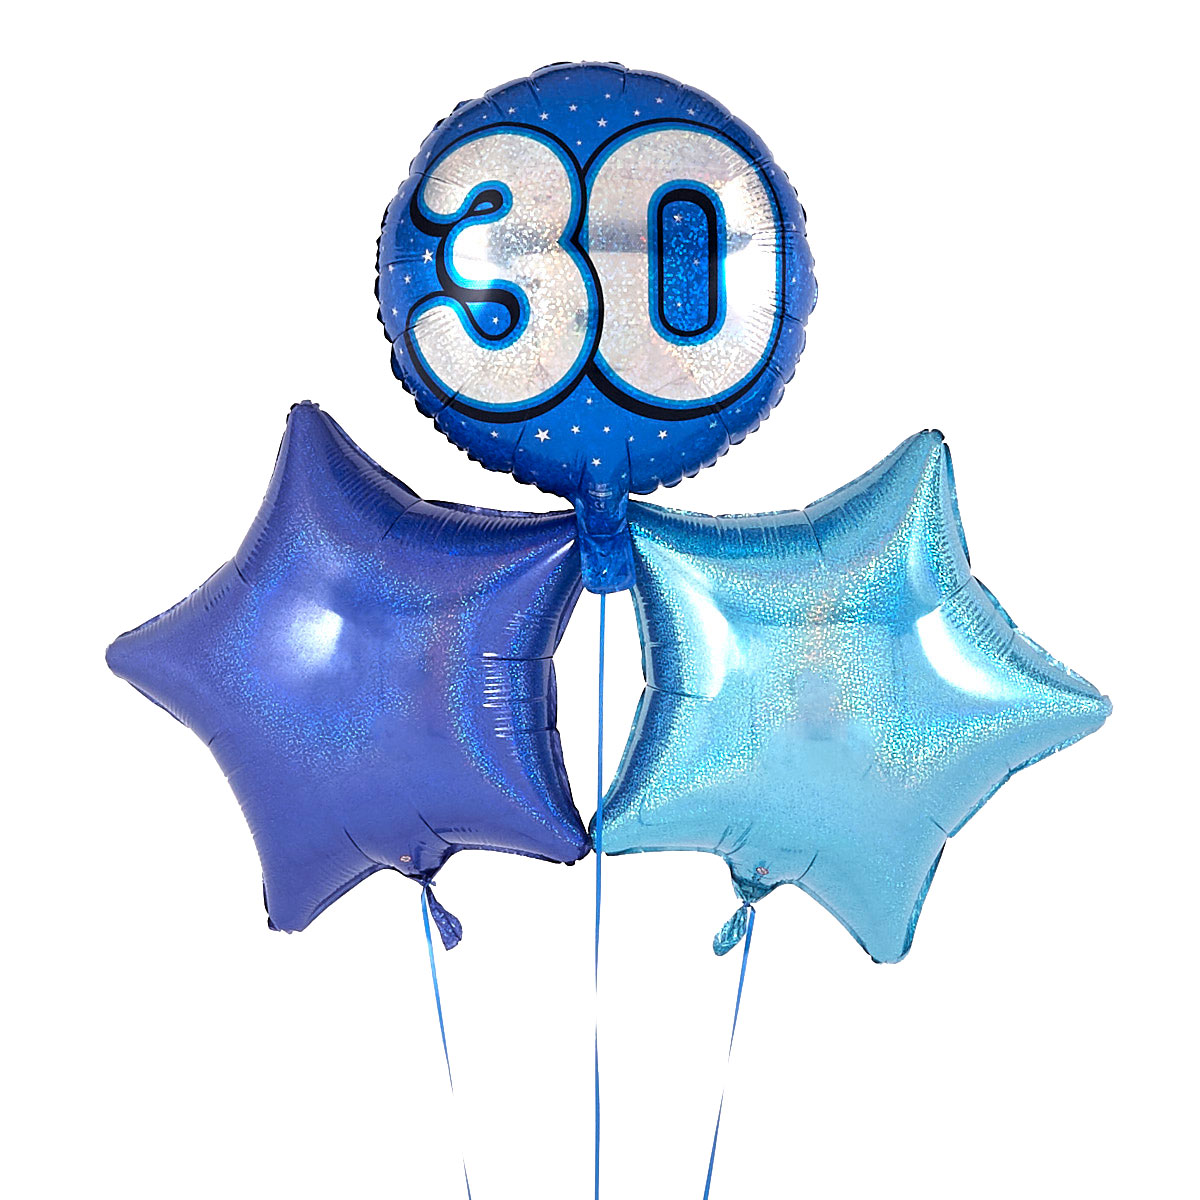 Blue 30th Birthday Balloon Bouquet - DELIVERED INFLATED!